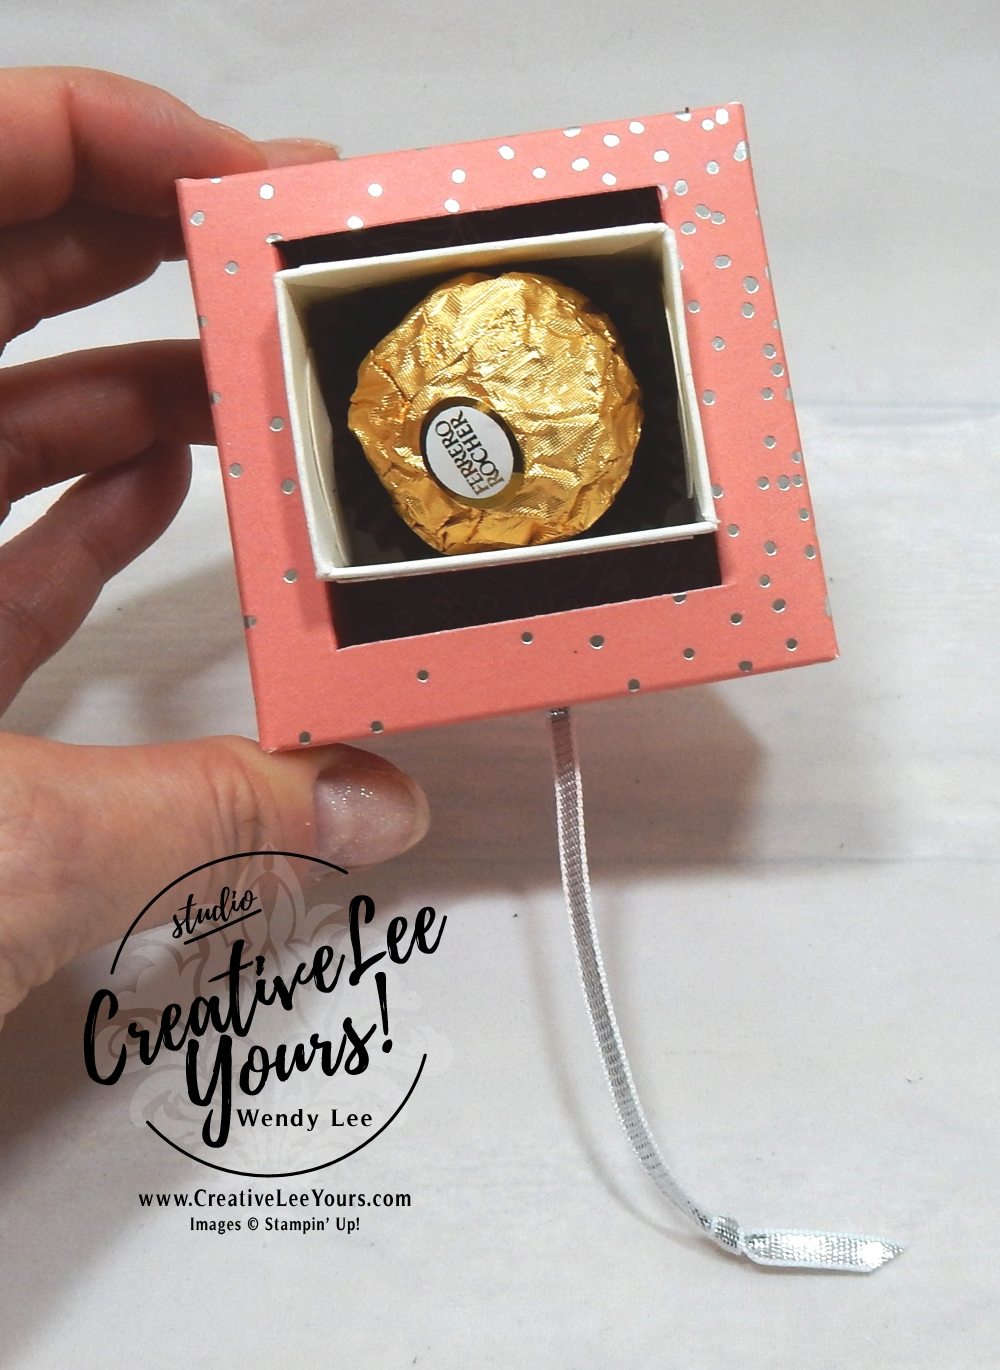 Pull & Turn Box by wendy lee, stampin up, handmade, stamping, #creativeleeyours, creatively yours, creative-lee yours, #makeacardsendacard, stamping, SU, Cake Soiree stamp set,seasonal layers thinits, free printable tutorial, embossing, candy treat holder